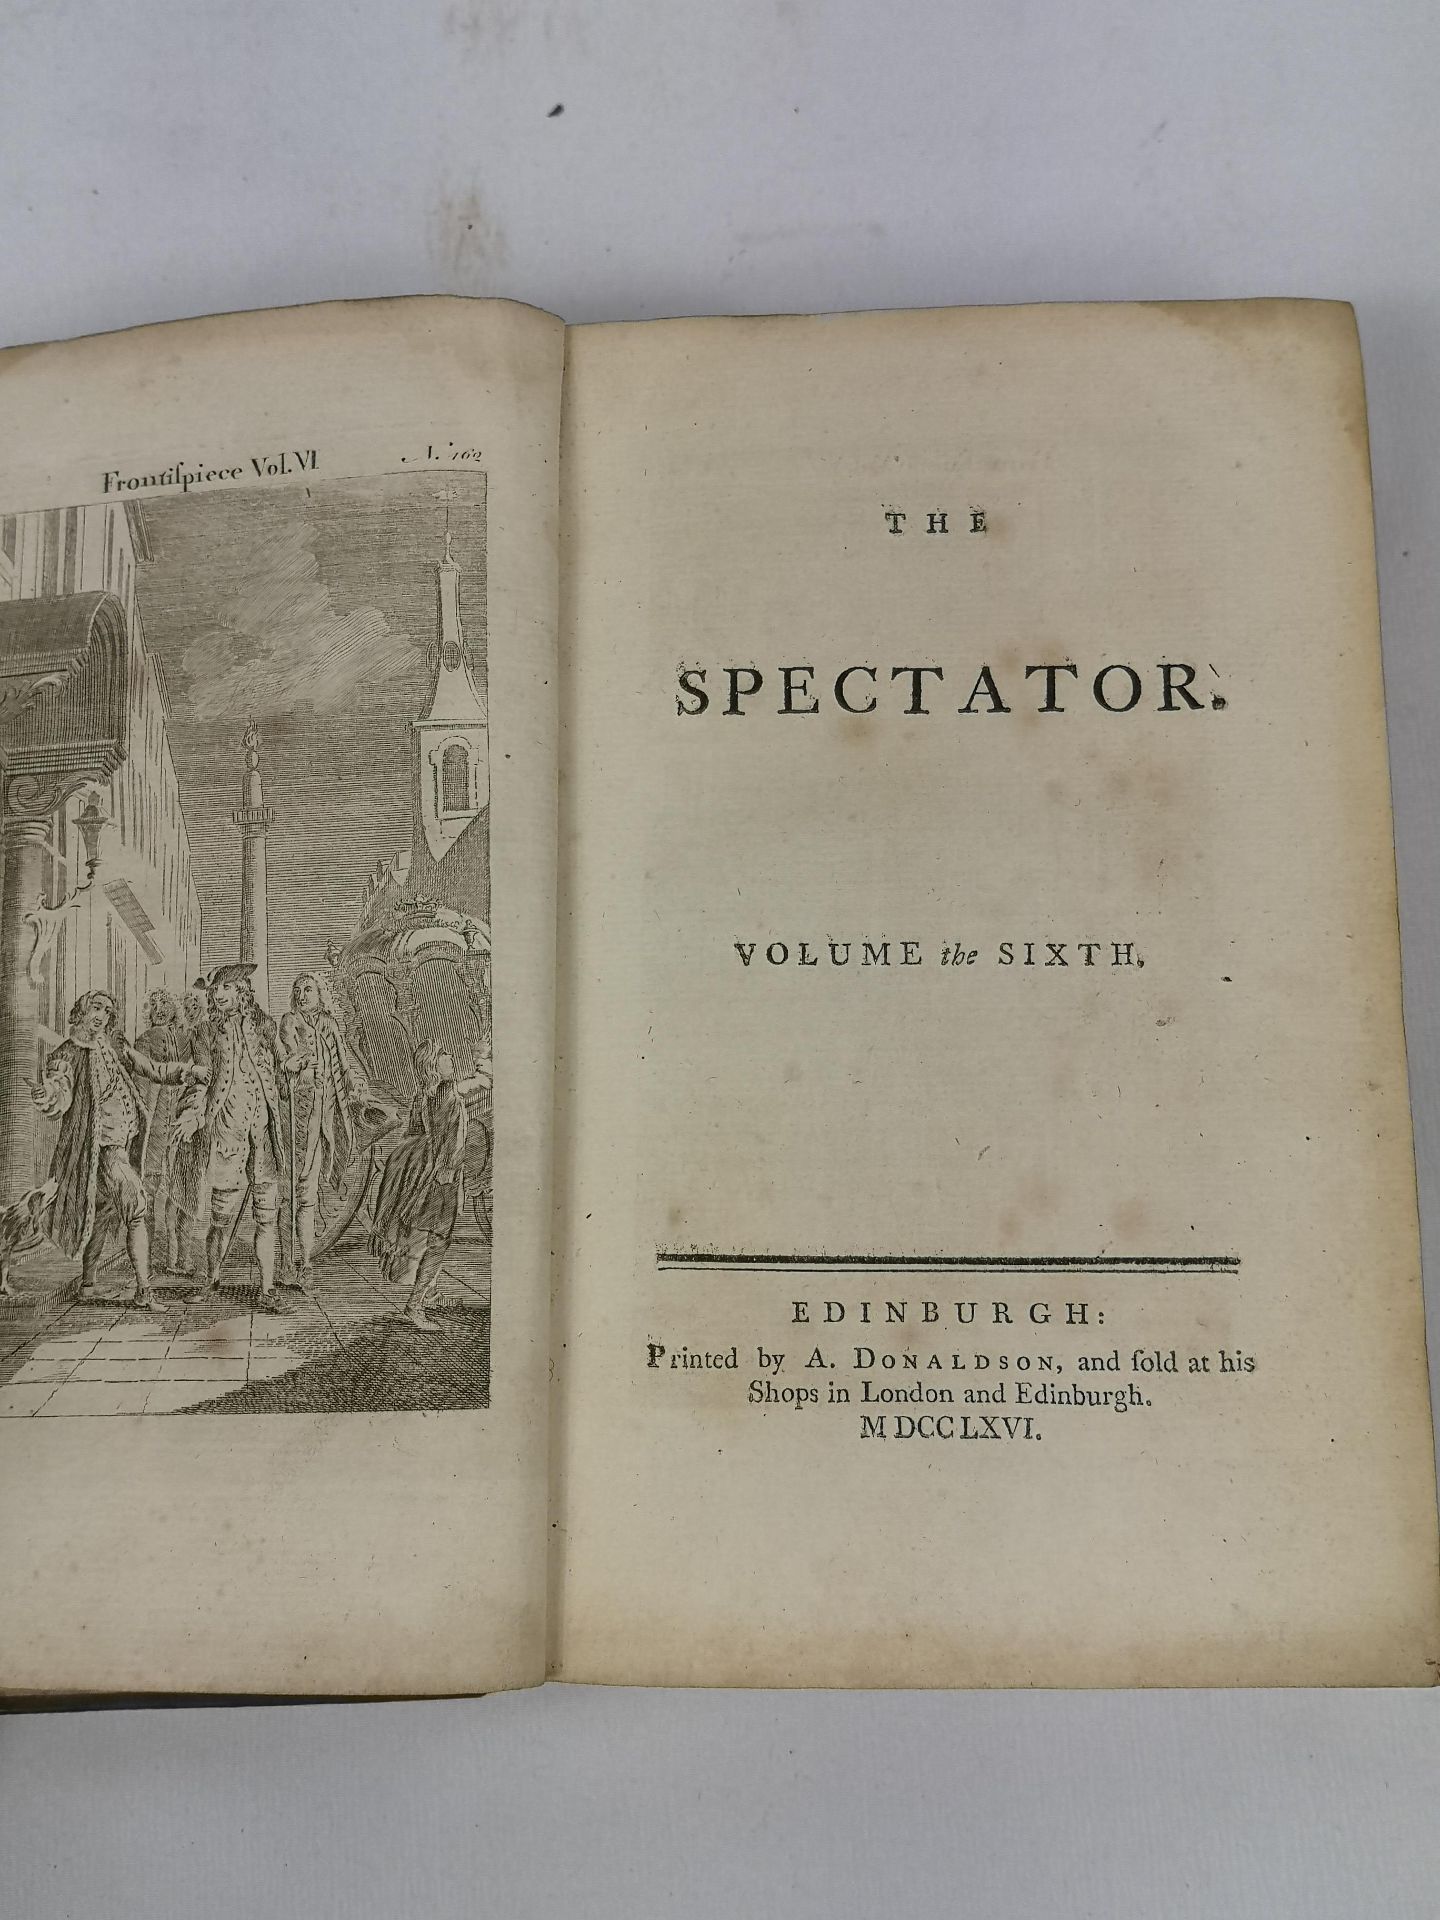 The Spectator, 2 volumes. Published London 1766 - Image 4 of 4